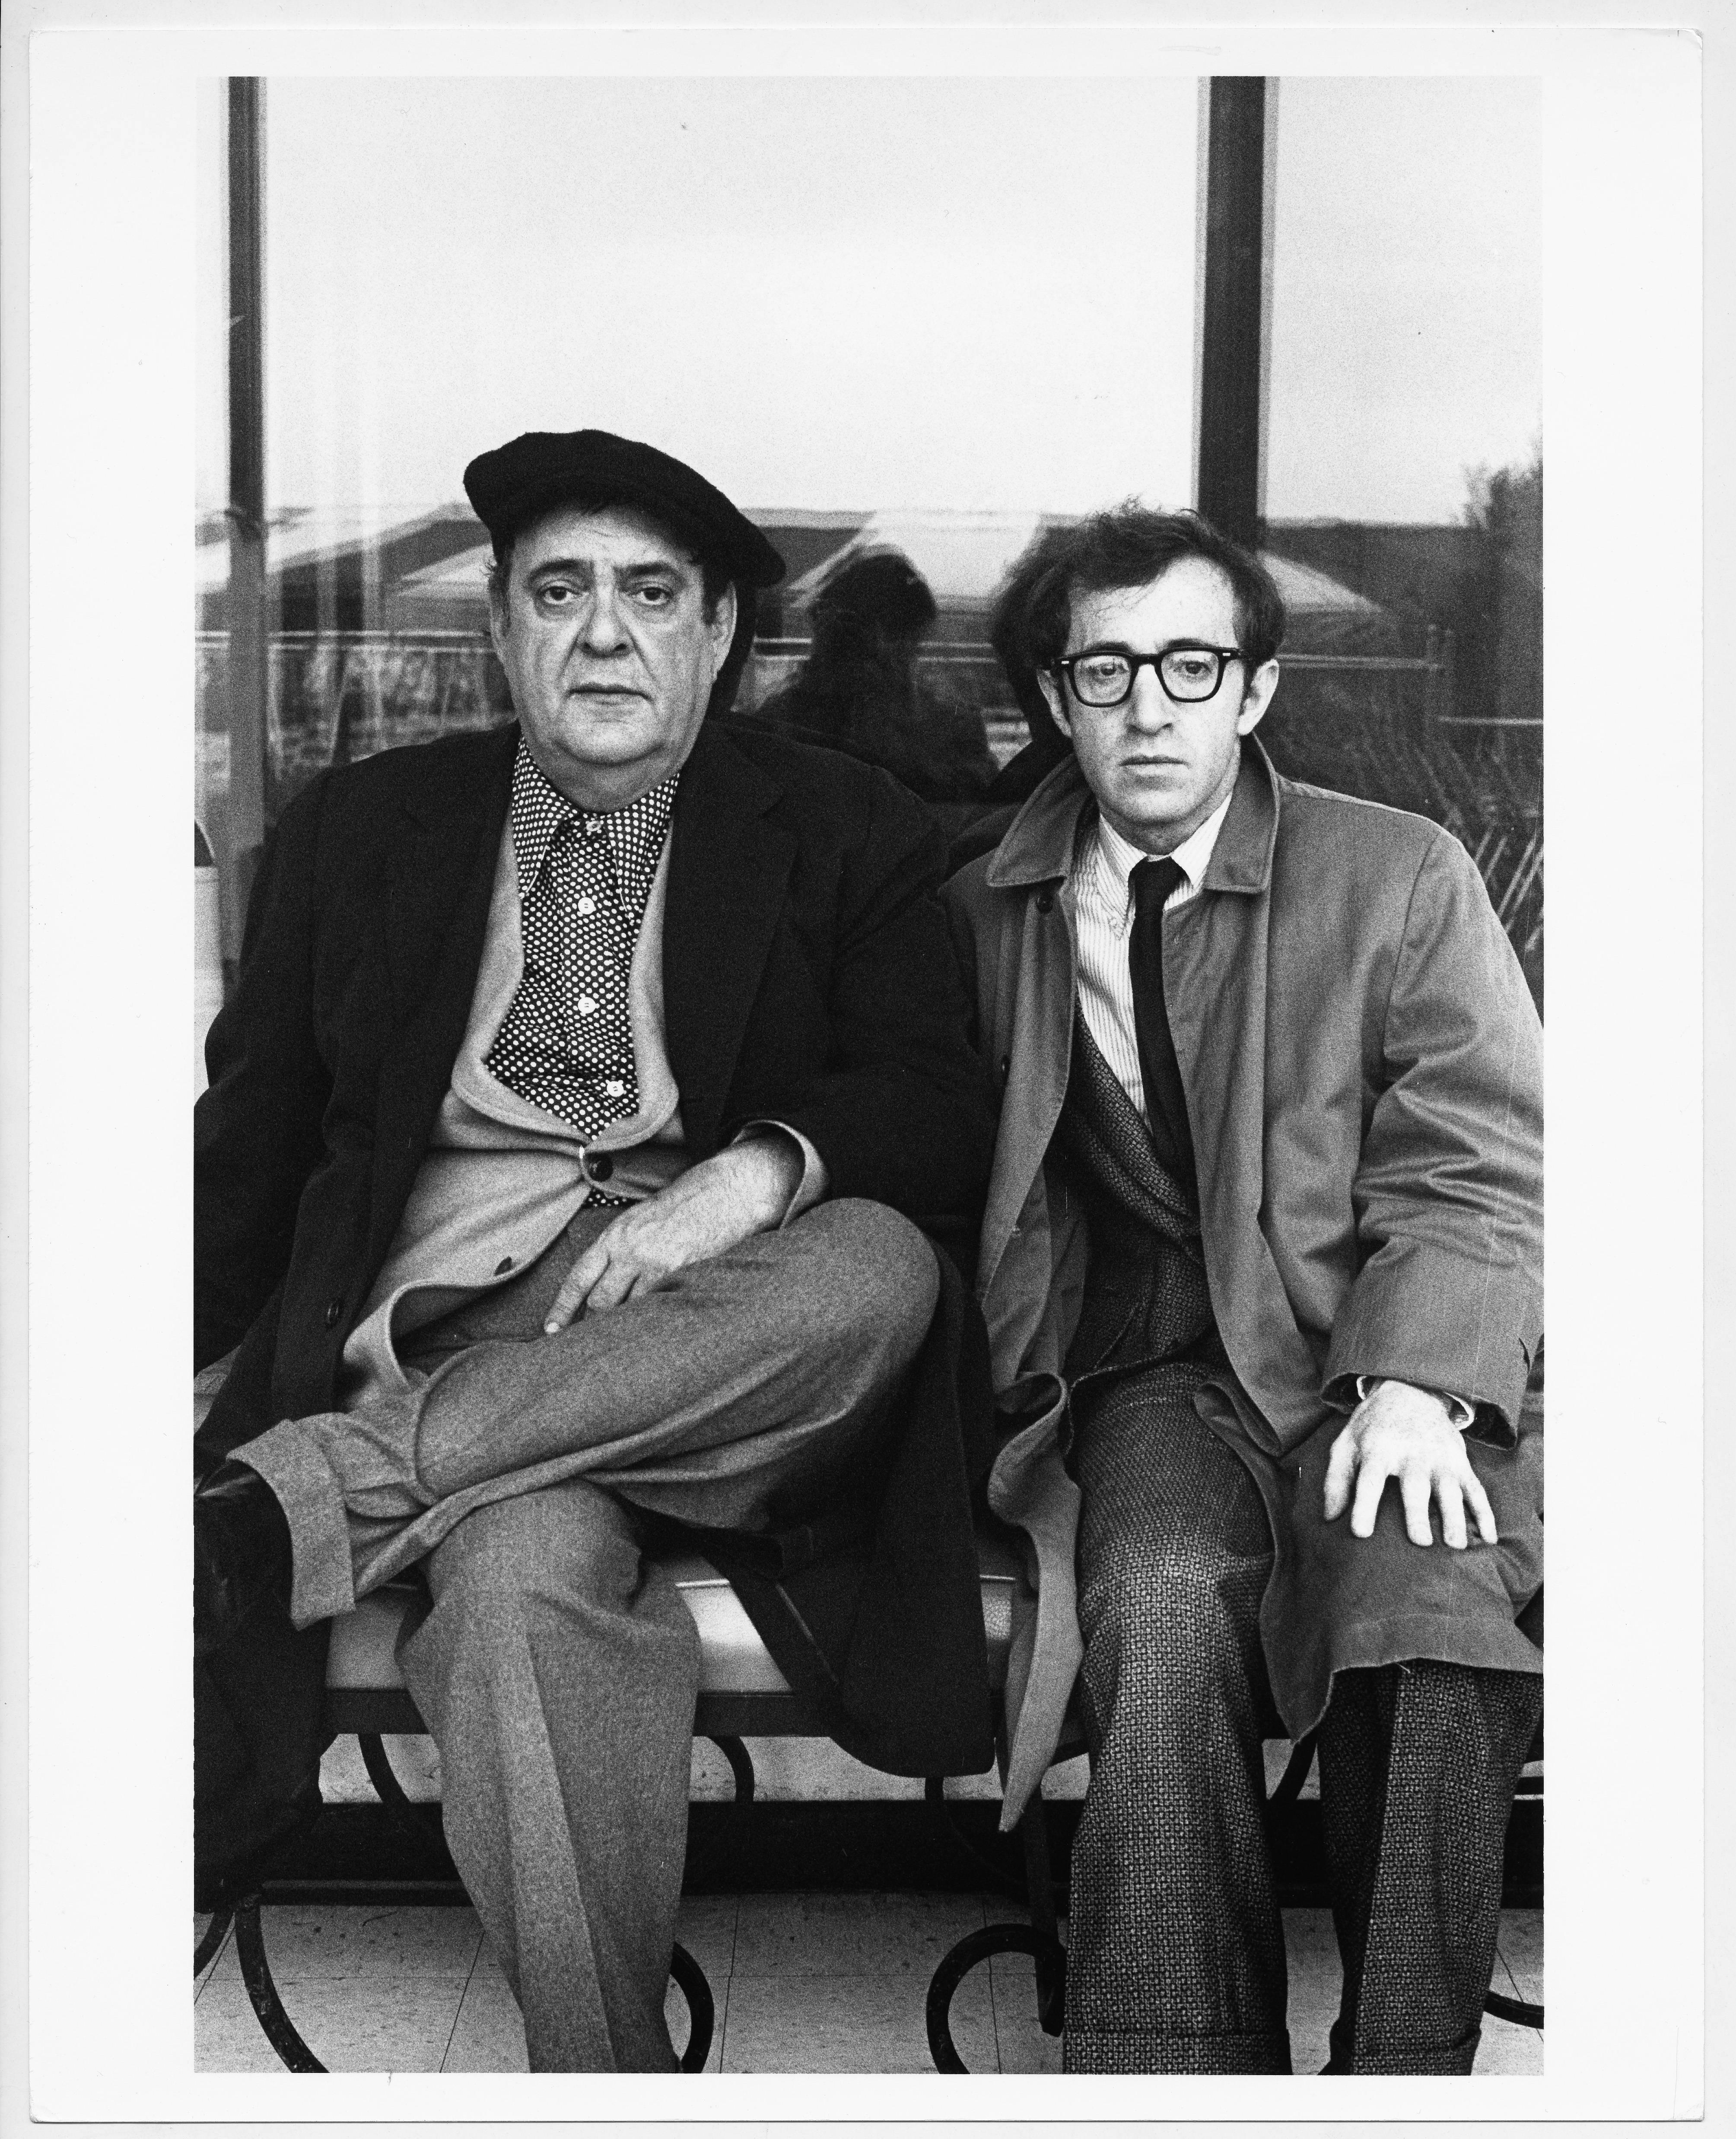 Zero Mostel and Woody Allen chilling during filming the movie „The Front“